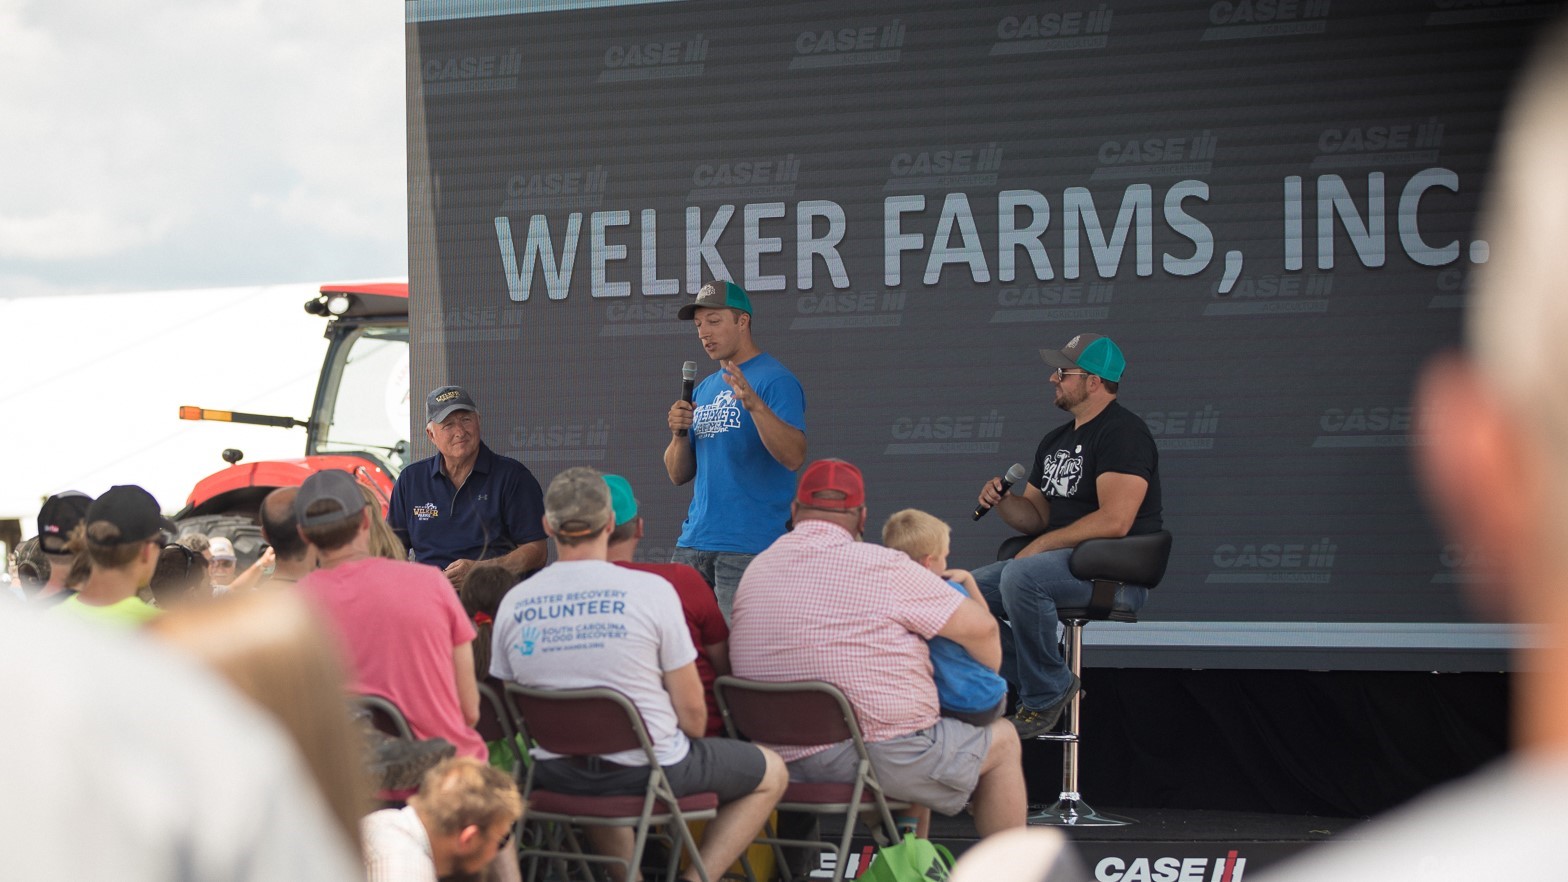 The newly formed partnership between Case IH and Welker Farms Inc. aims to inspire future farmers.